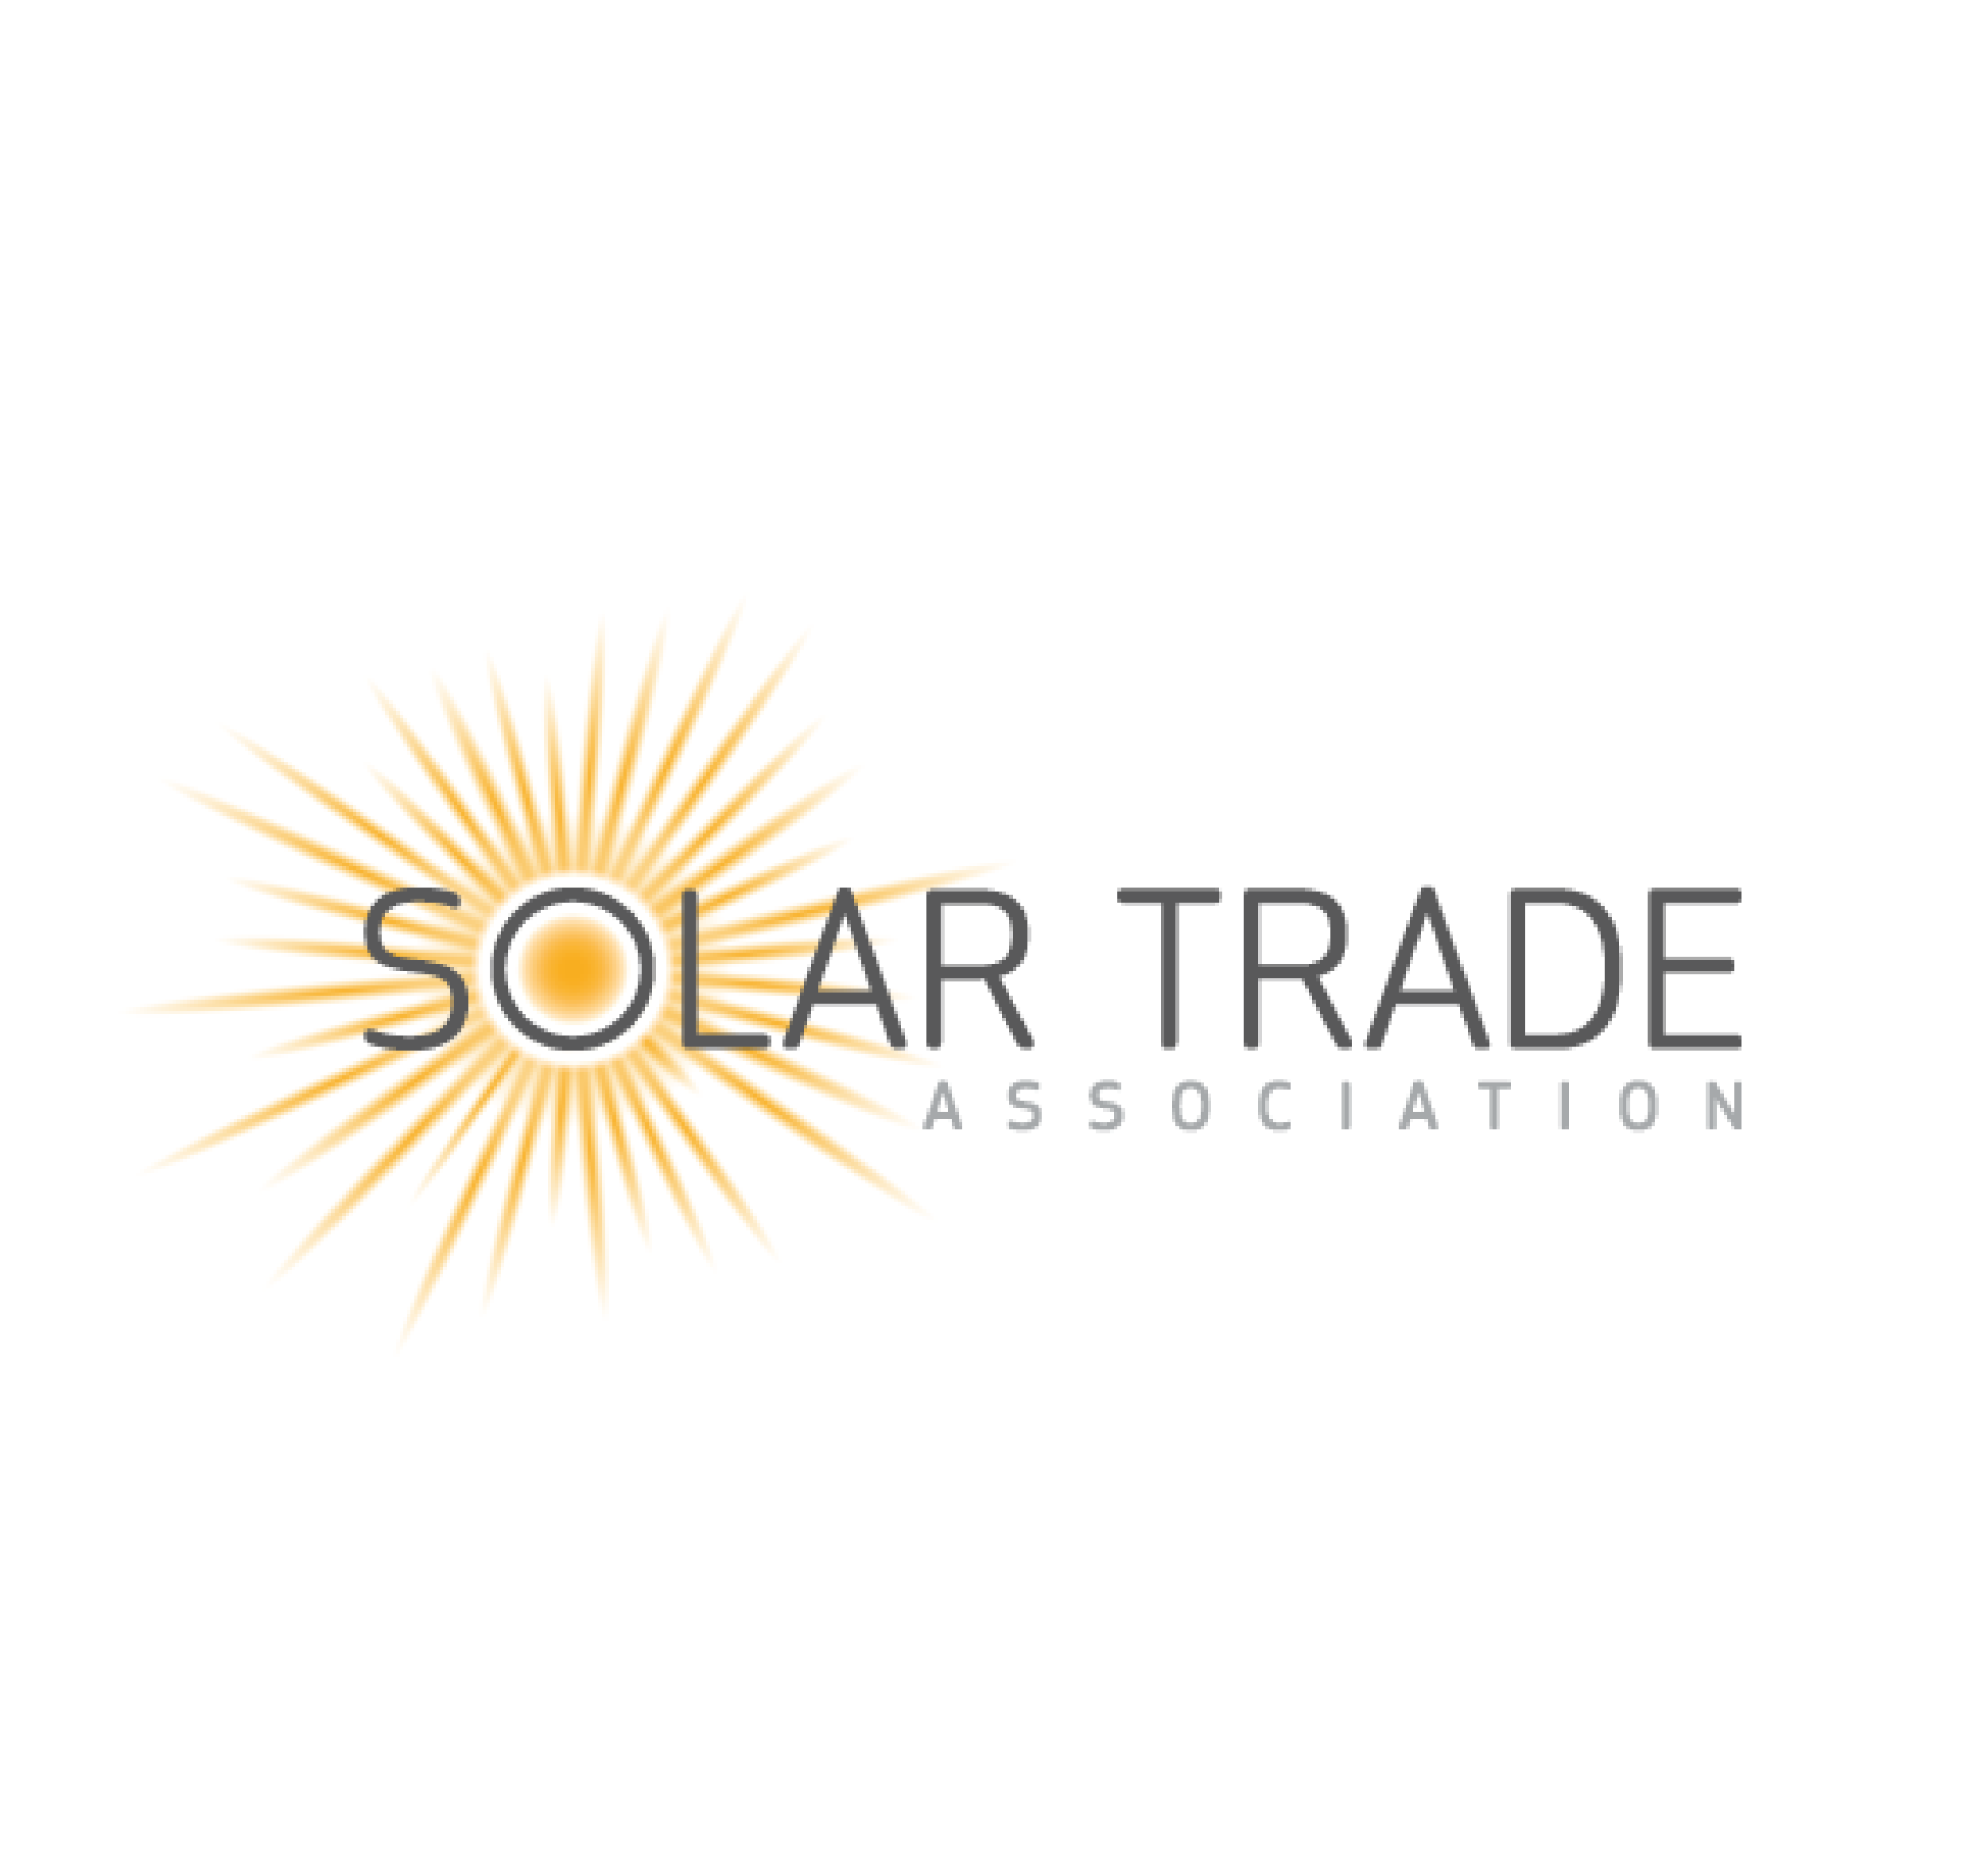 solartrade-01 (white background).png